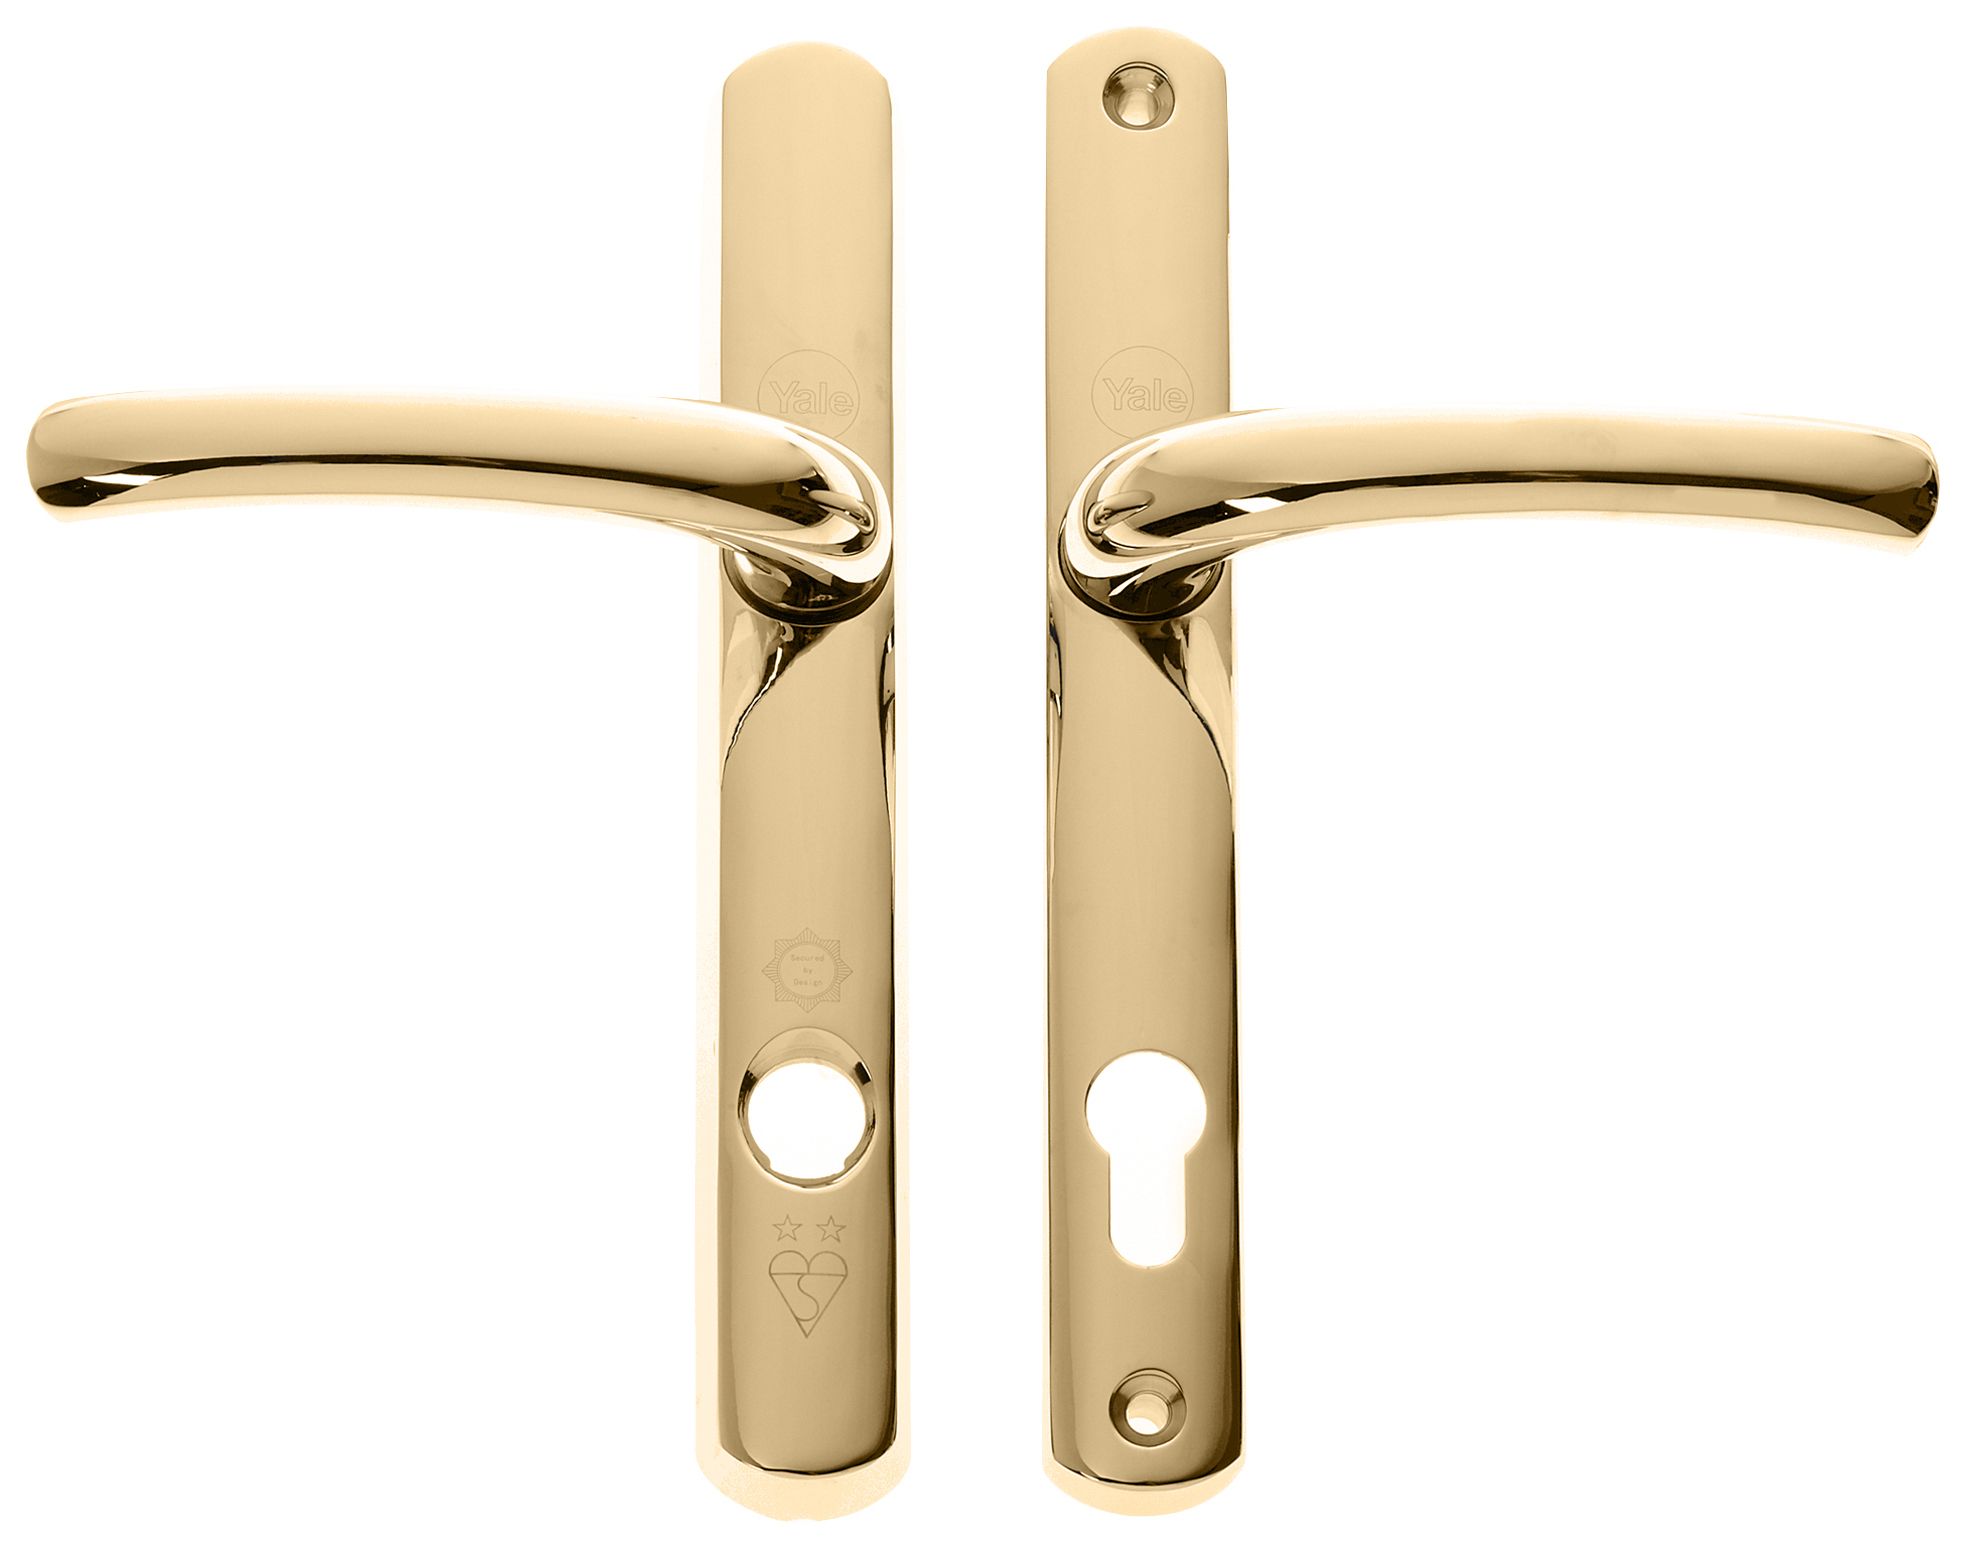 Image of Yale TS007 2* Platinum Security Door Handle - Polished Gold